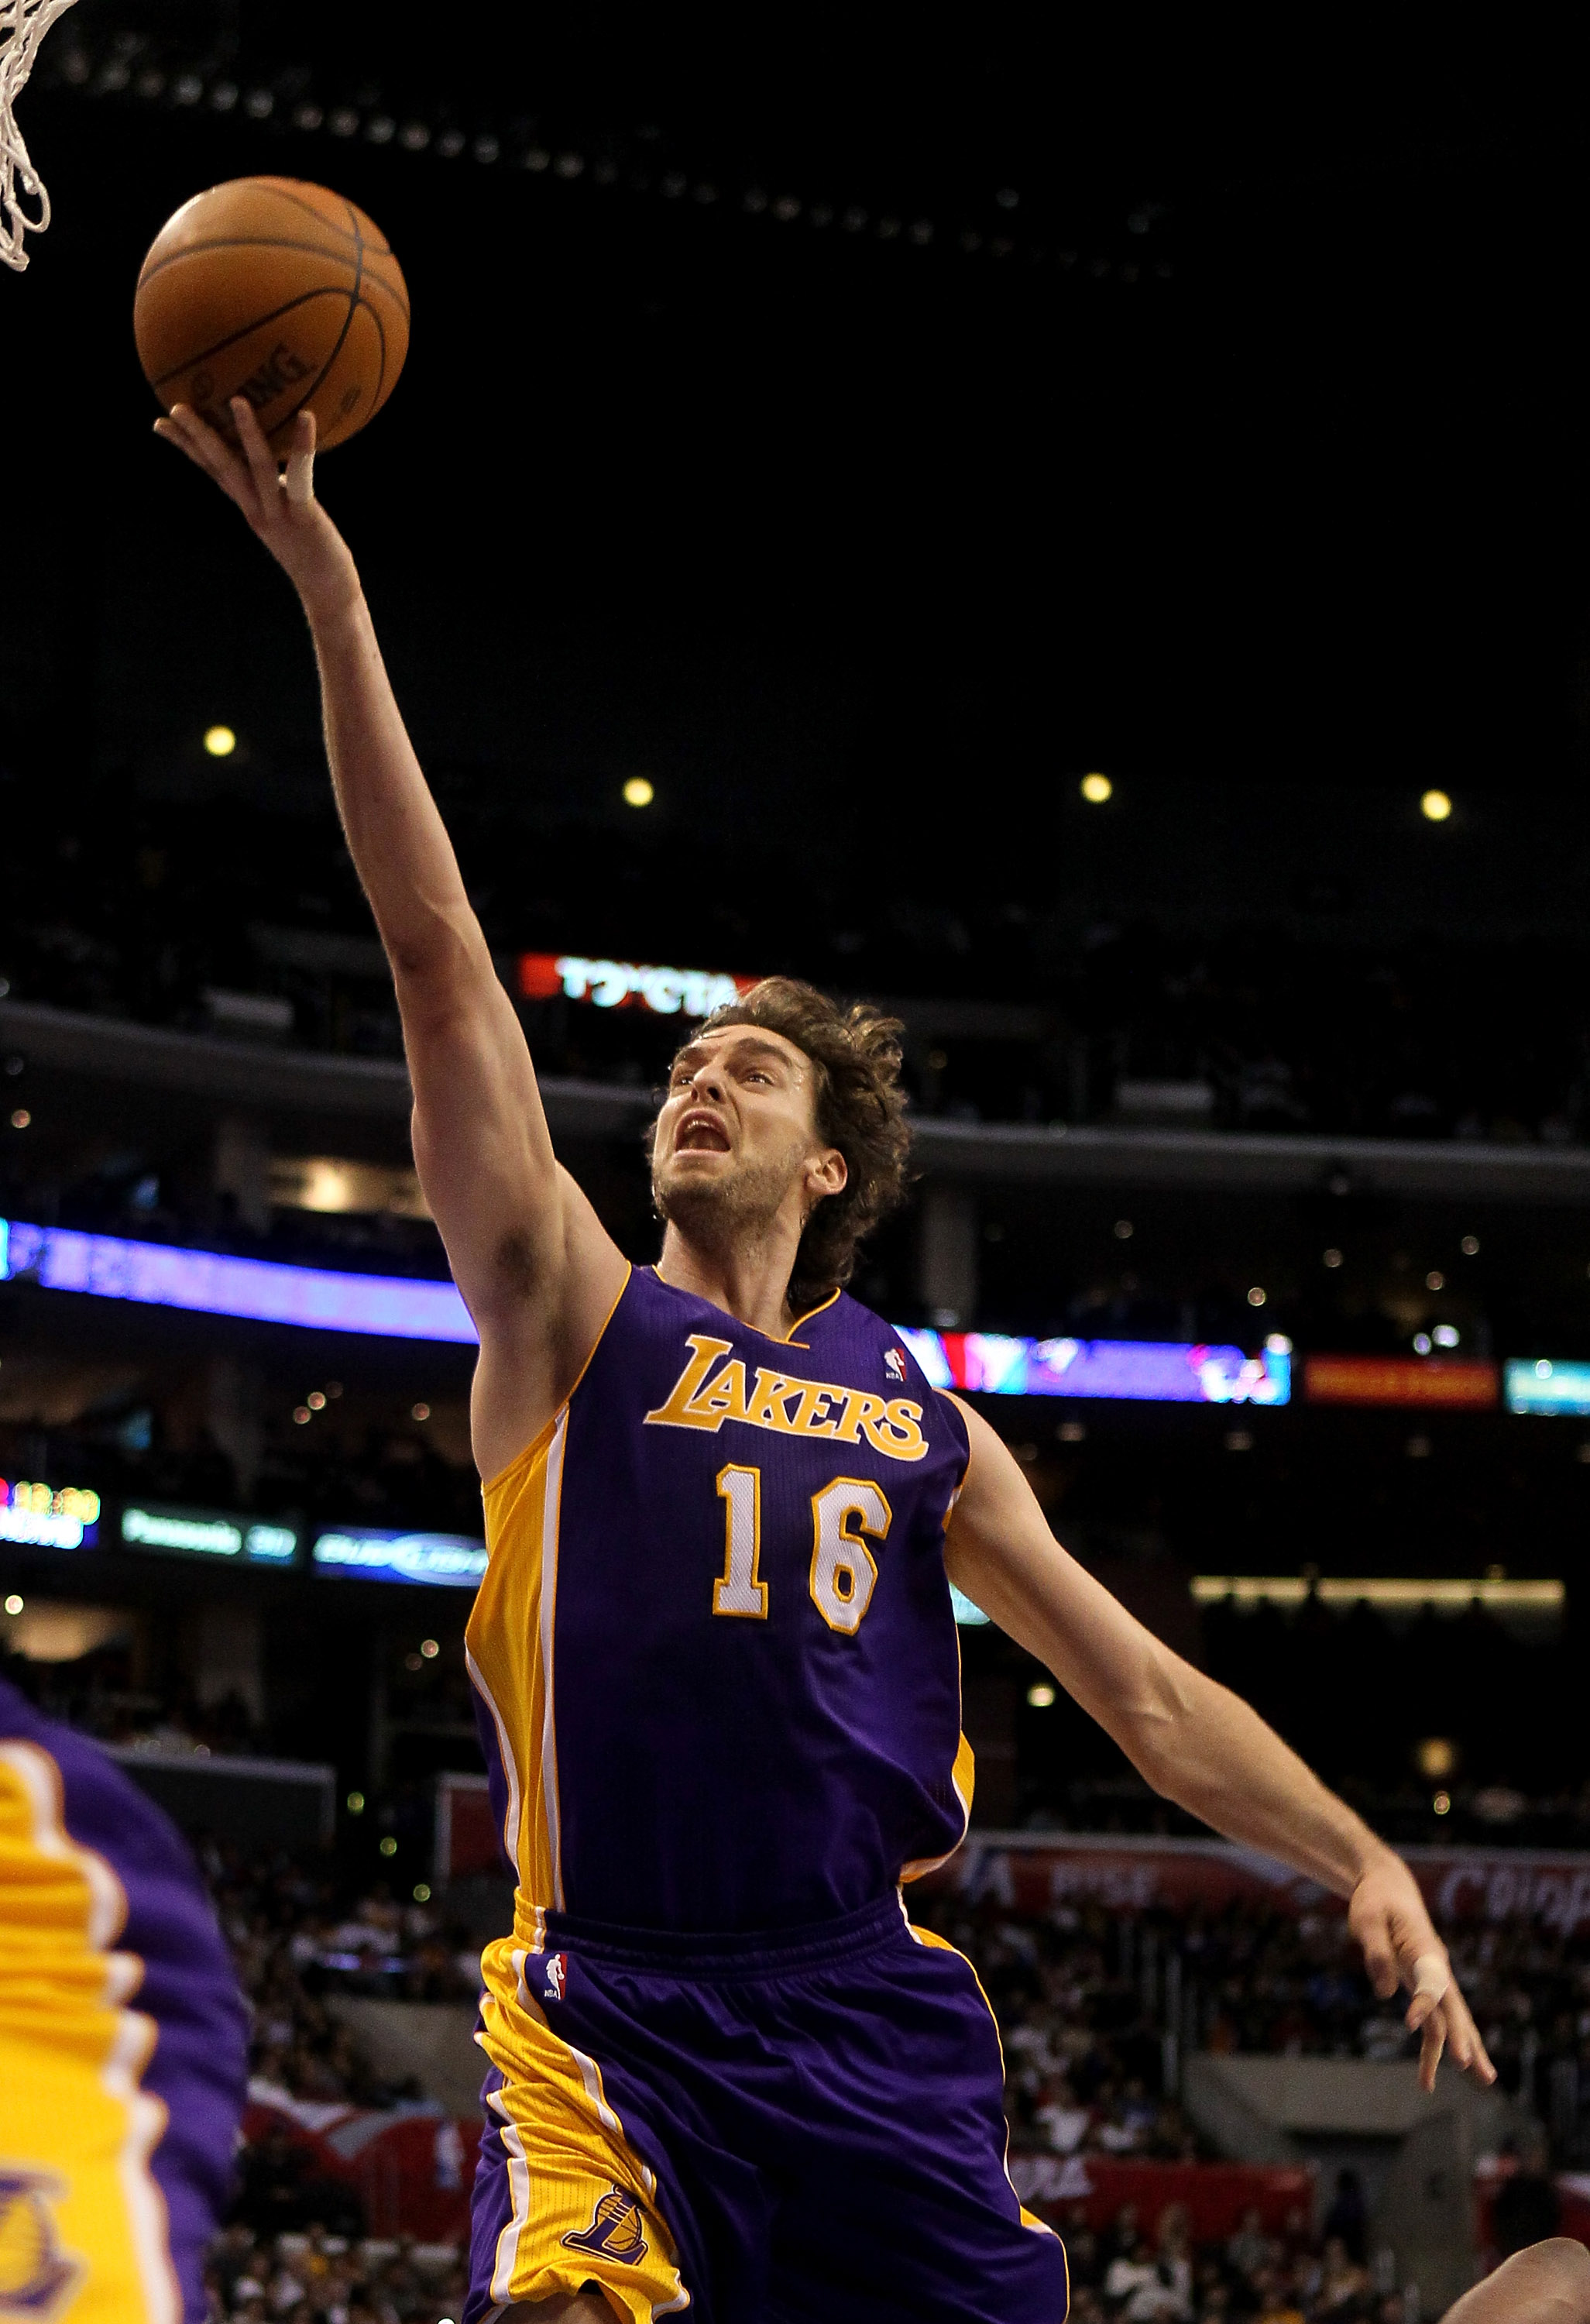 LOS ANGELES, CA - DECEMBER 08:  Pau Gasol #16 of the Los Angeles Lakers shoots against the Los Angeles Clippers at Staples Center on December 8, 2010 in Los Angeles, California.  NOTE TO USER: User expressly acknowledges and agrees that, by downloading an